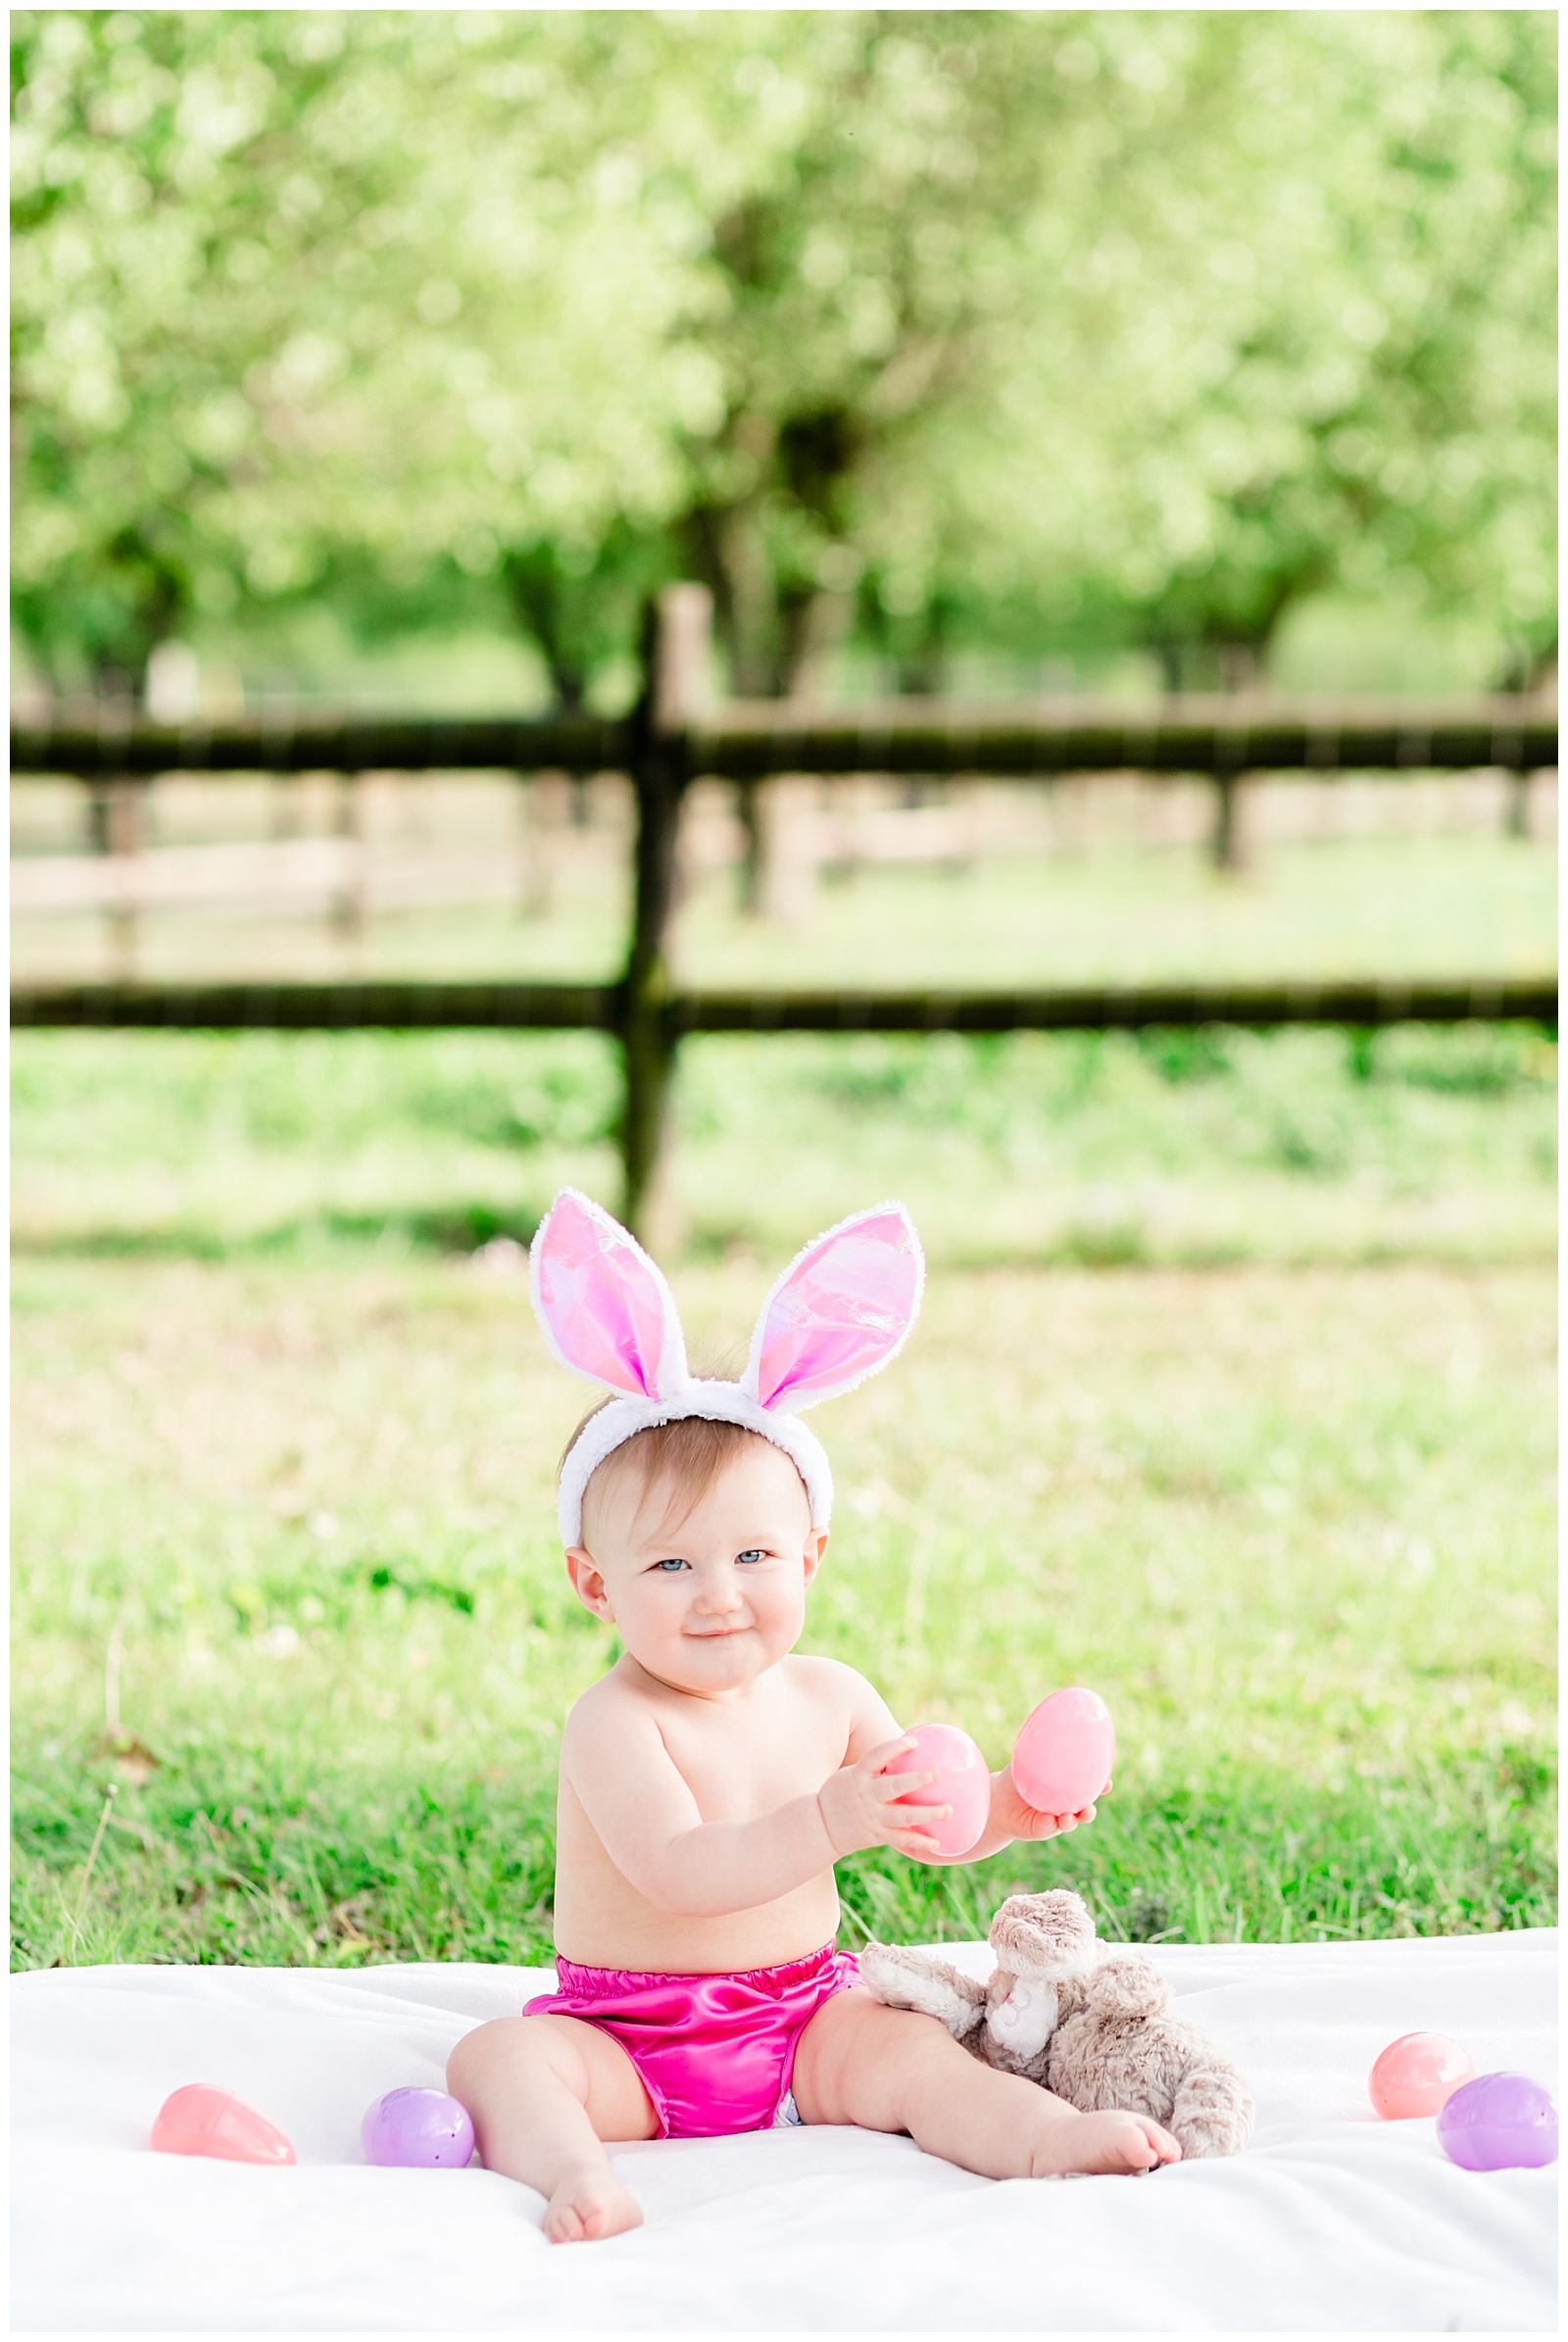 Easter Spring One Year Old Birthday Session for Baby Girl with Different Shades of Pink, Easter Eggs and Bunny Ears